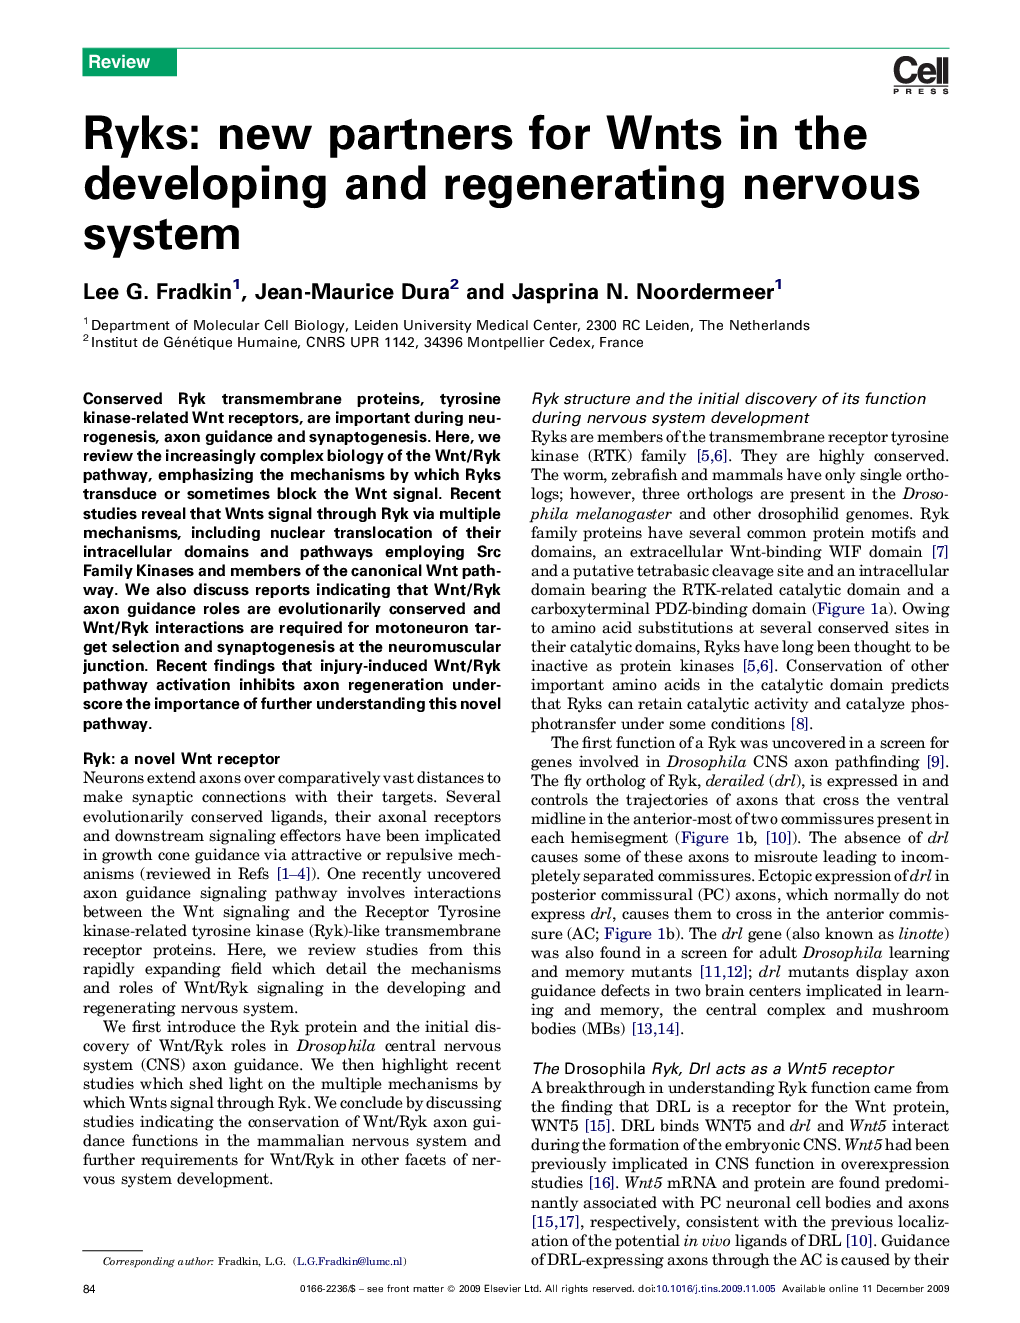 Ryks: new partners for Wnts in the developing and regenerating nervous system